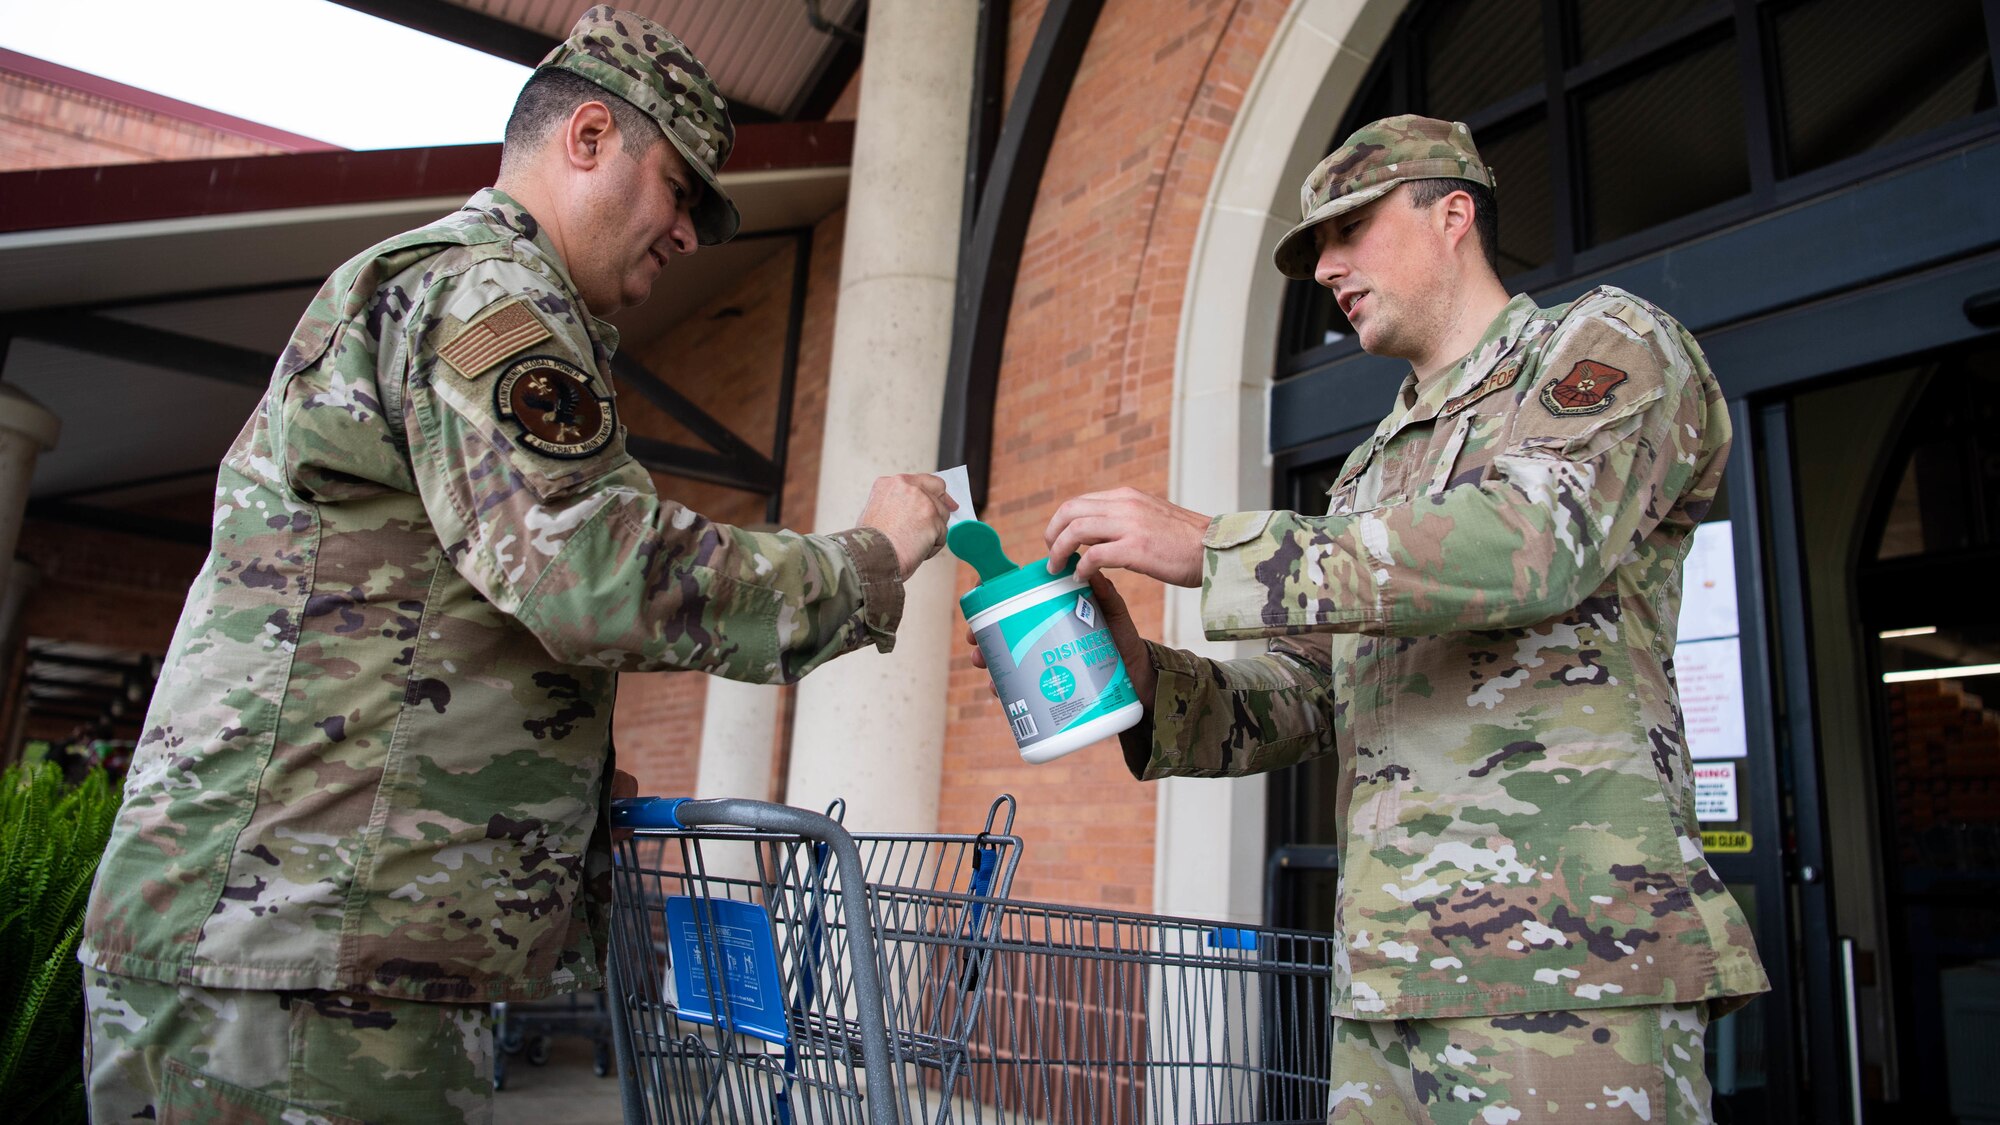 Tech. Sgt. Tom Parsons, 2nd Mission Support Group executive assistant, hands out sanitizing wipes at the commissary at Barksdale Air Force Base, La., March 24, 2020. The Barksdale commissary has implemented a number of safety guidelines to stop the spread of germs, including: sanitizing registers and door handles more frequently than normal, marking lines on the floor to ensure people keep a six foot distance and even making routine intercom announcements to remind customers of common health guidelines. (U.S. Air Force photo by Airman 1st Class Jacob B. Wrightsman)